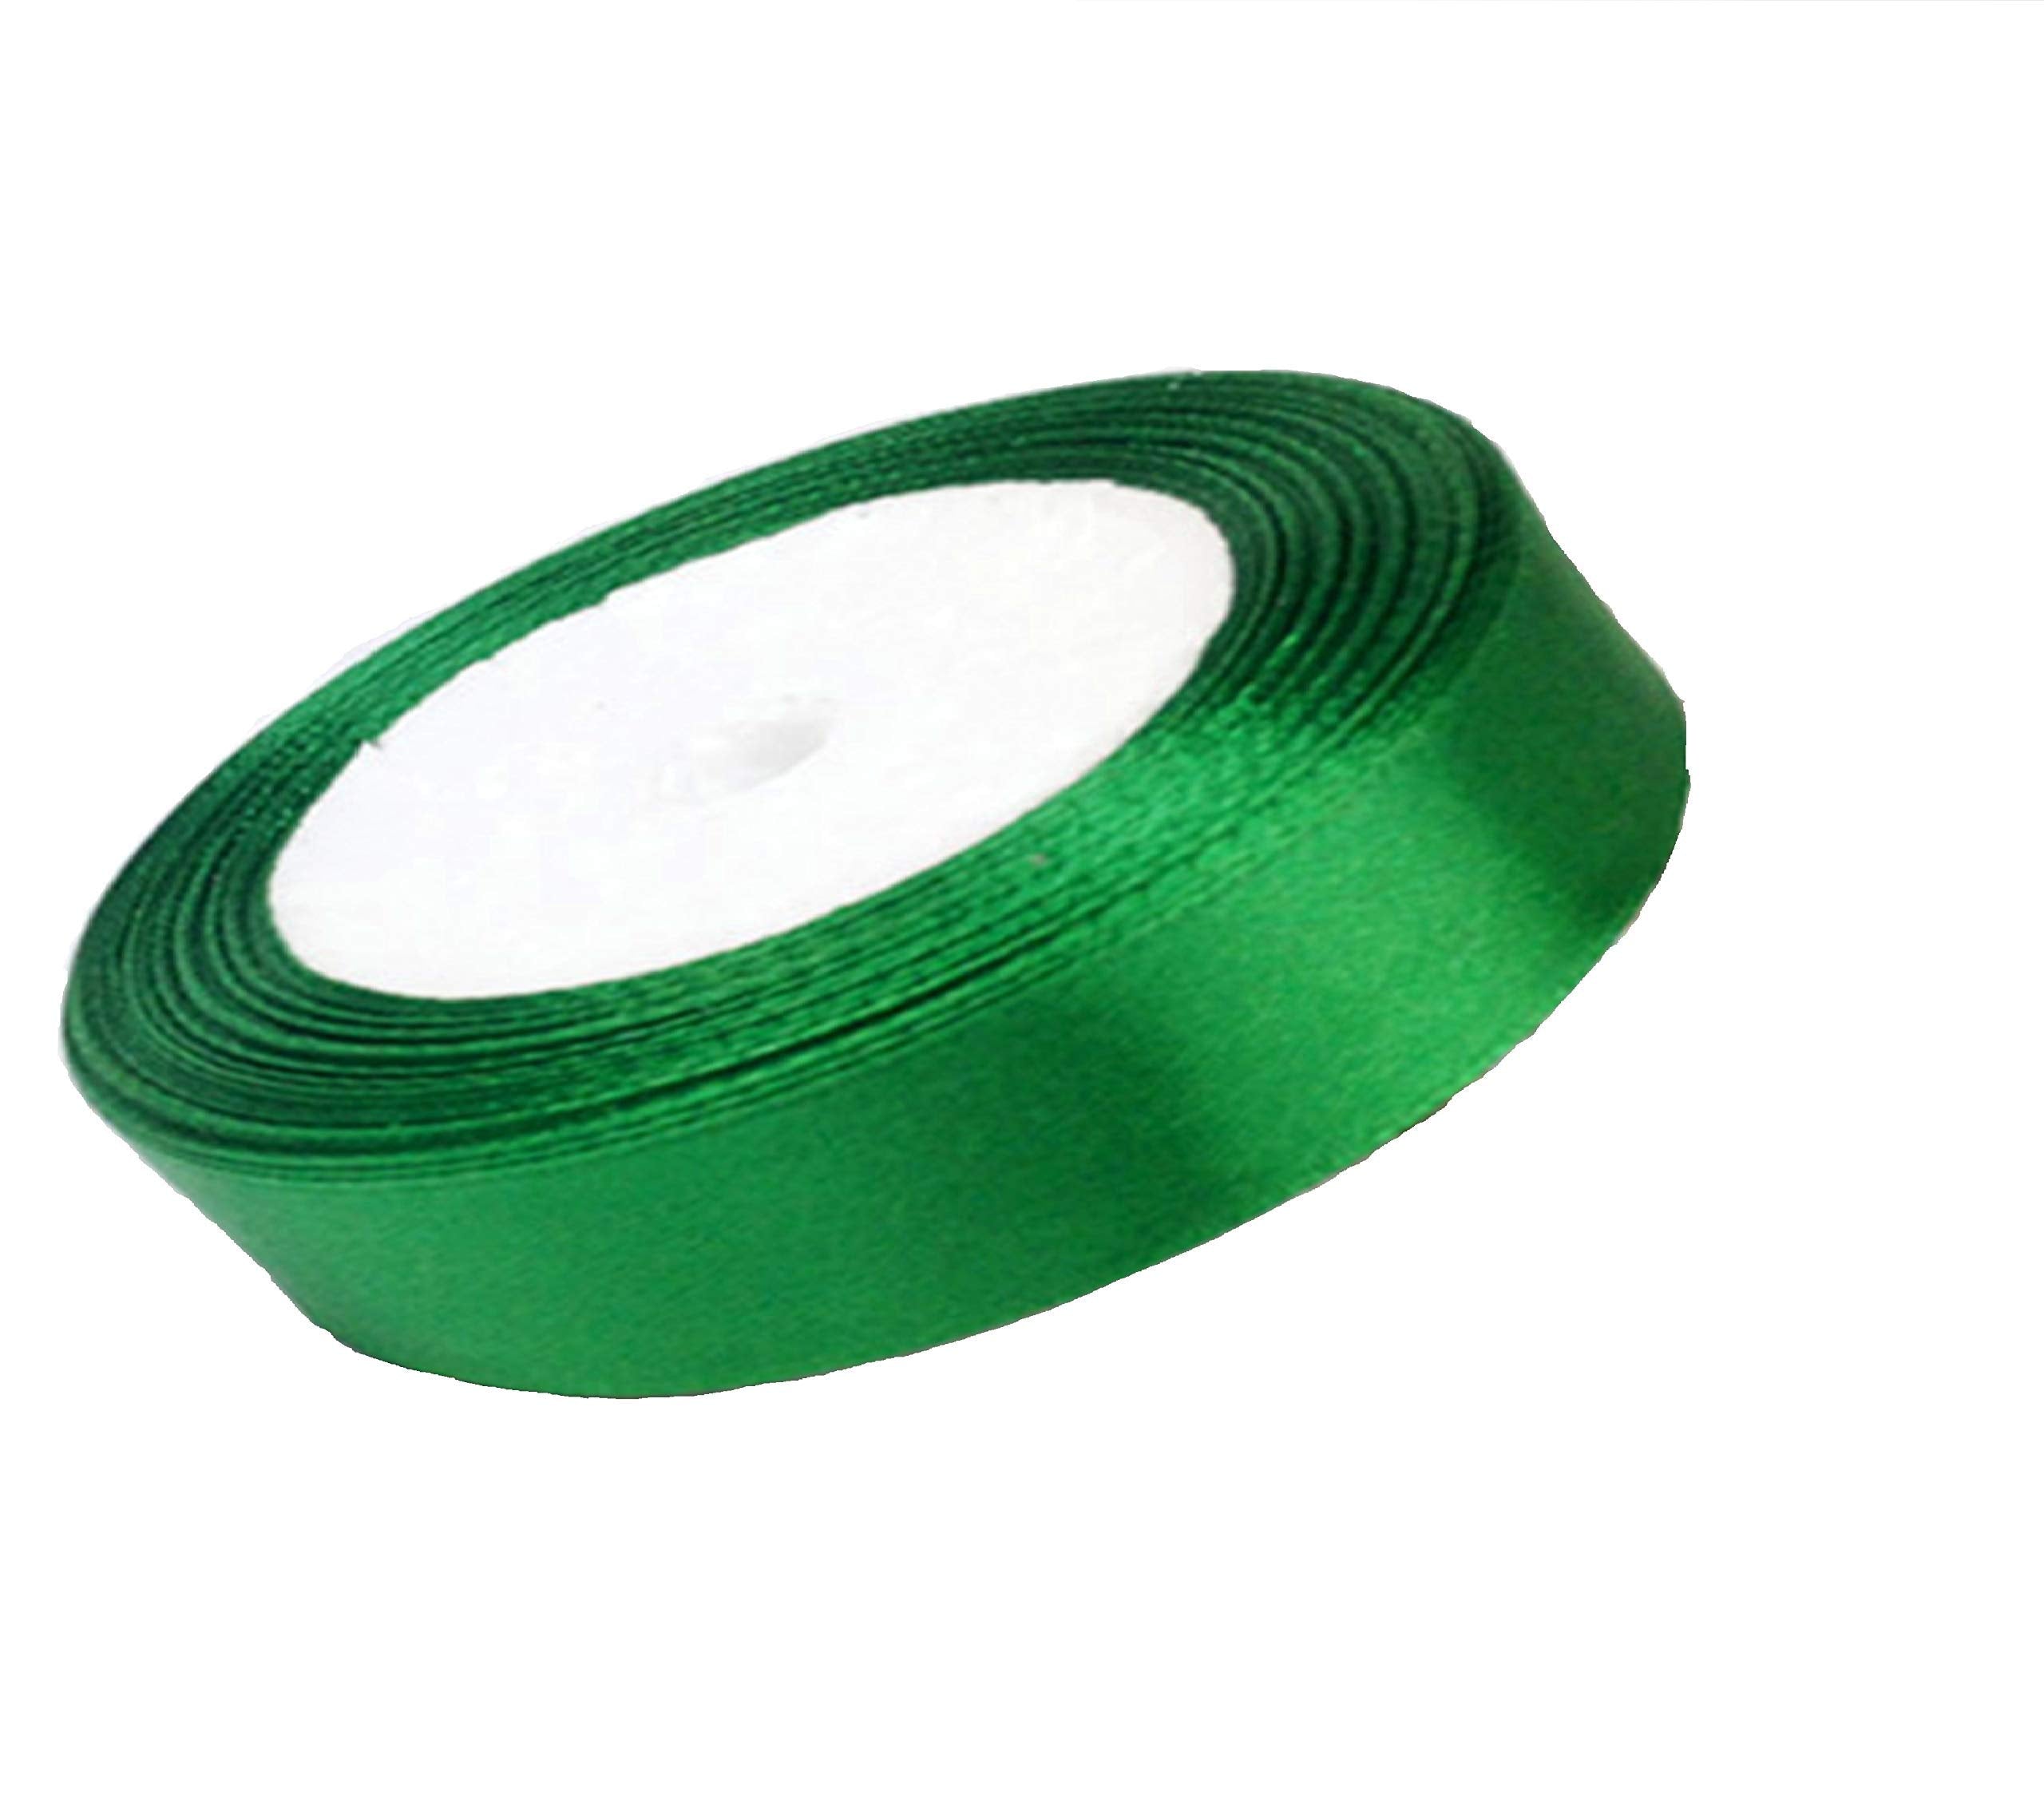 25 Meters of Satin Wedding Party Ribbon 15mm in Multiple Colours Pack Rolls (Emerald Green) for Gifts Wrap, Sew, Decorations, Crafts, Dress, Bows and Much More